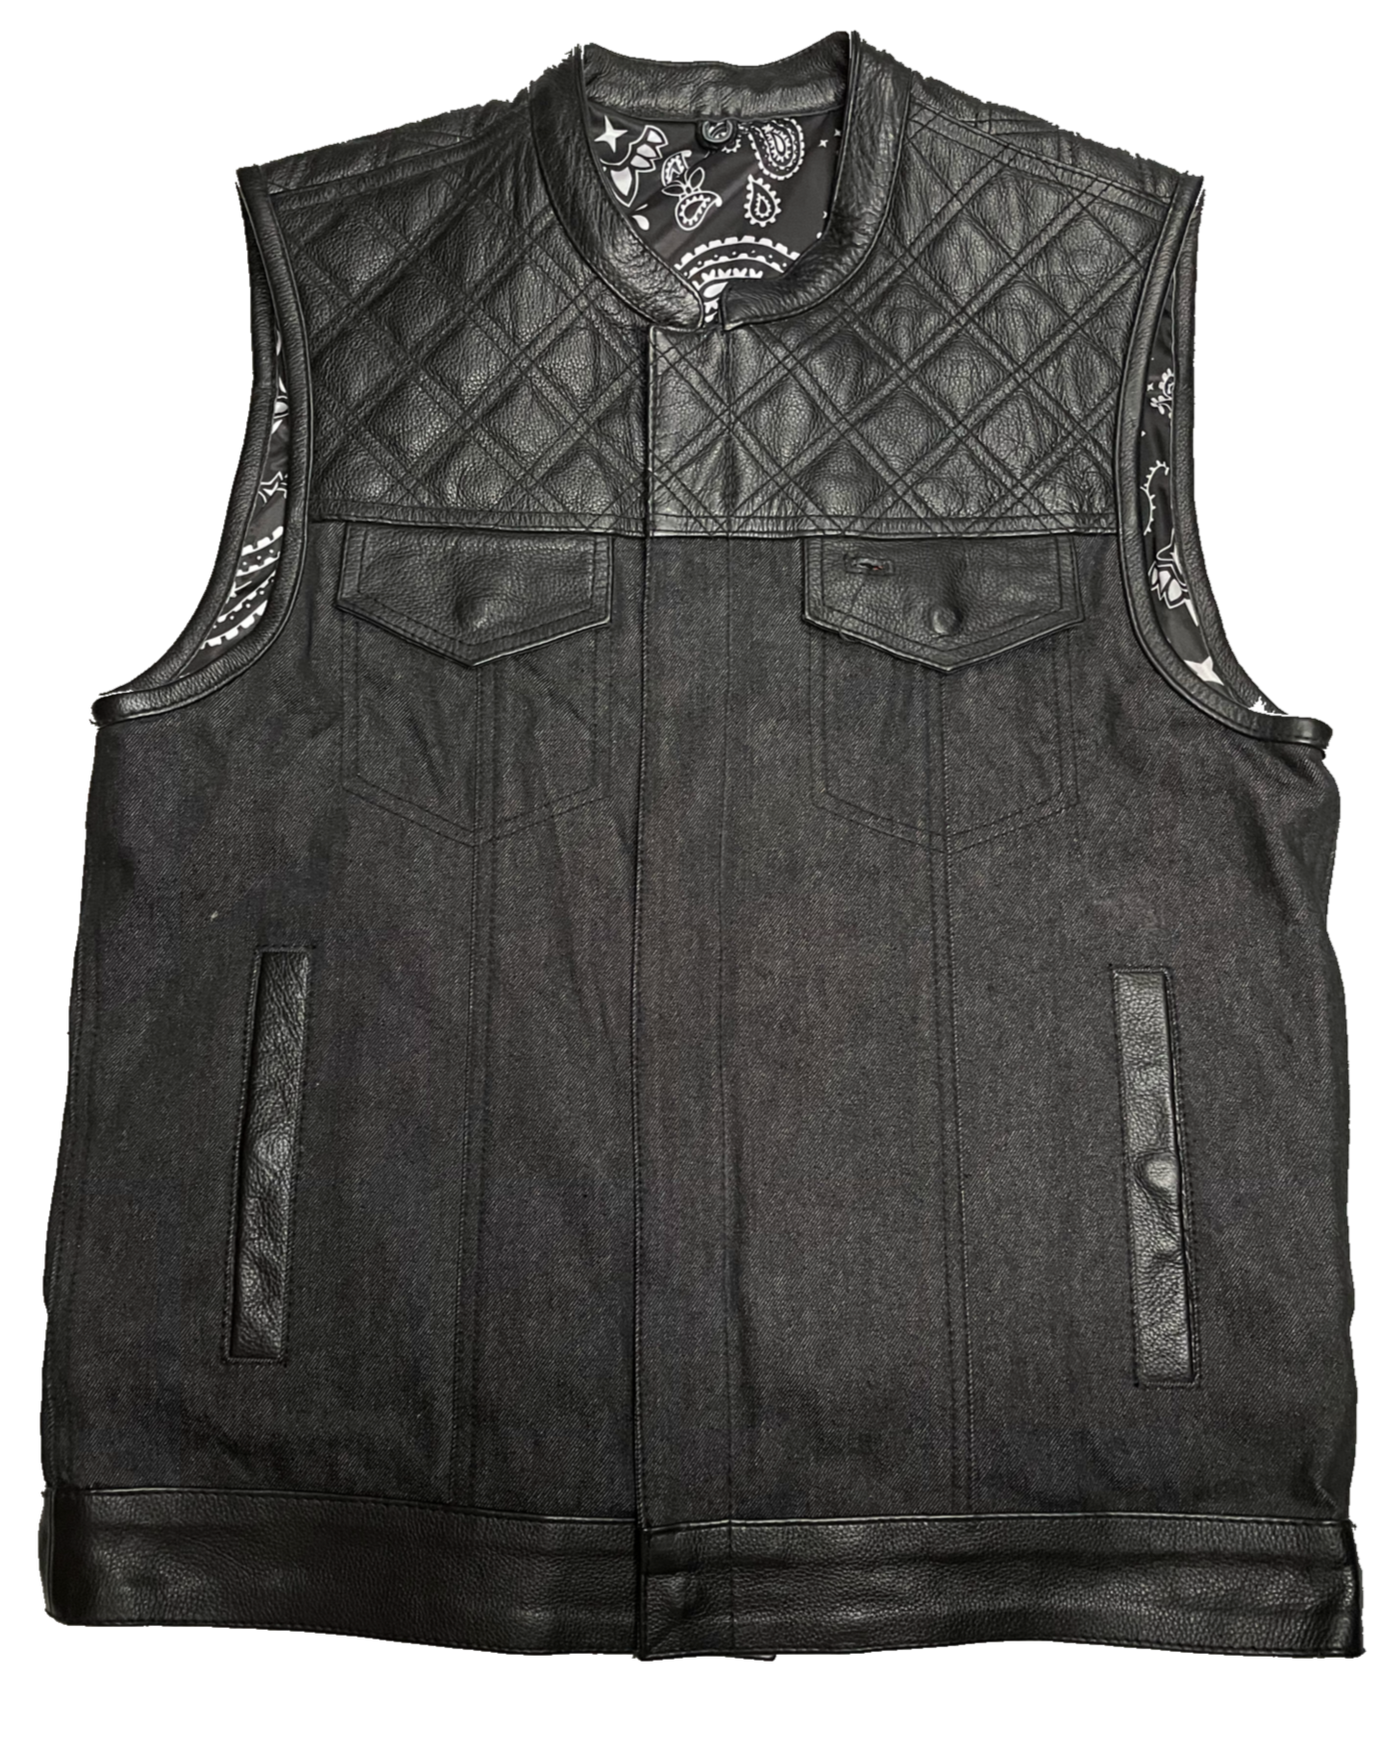 Premium black leather/denim club style vest with DIAMOND STITCHING. The lining is black paisley pattern. Vest is made from premium naked cowhide leather and denim. It has a tab style collar and front snap closure. It has a solid panel back.  Available for purchase in our shop in Smyrna, TN outside of Nashville. 